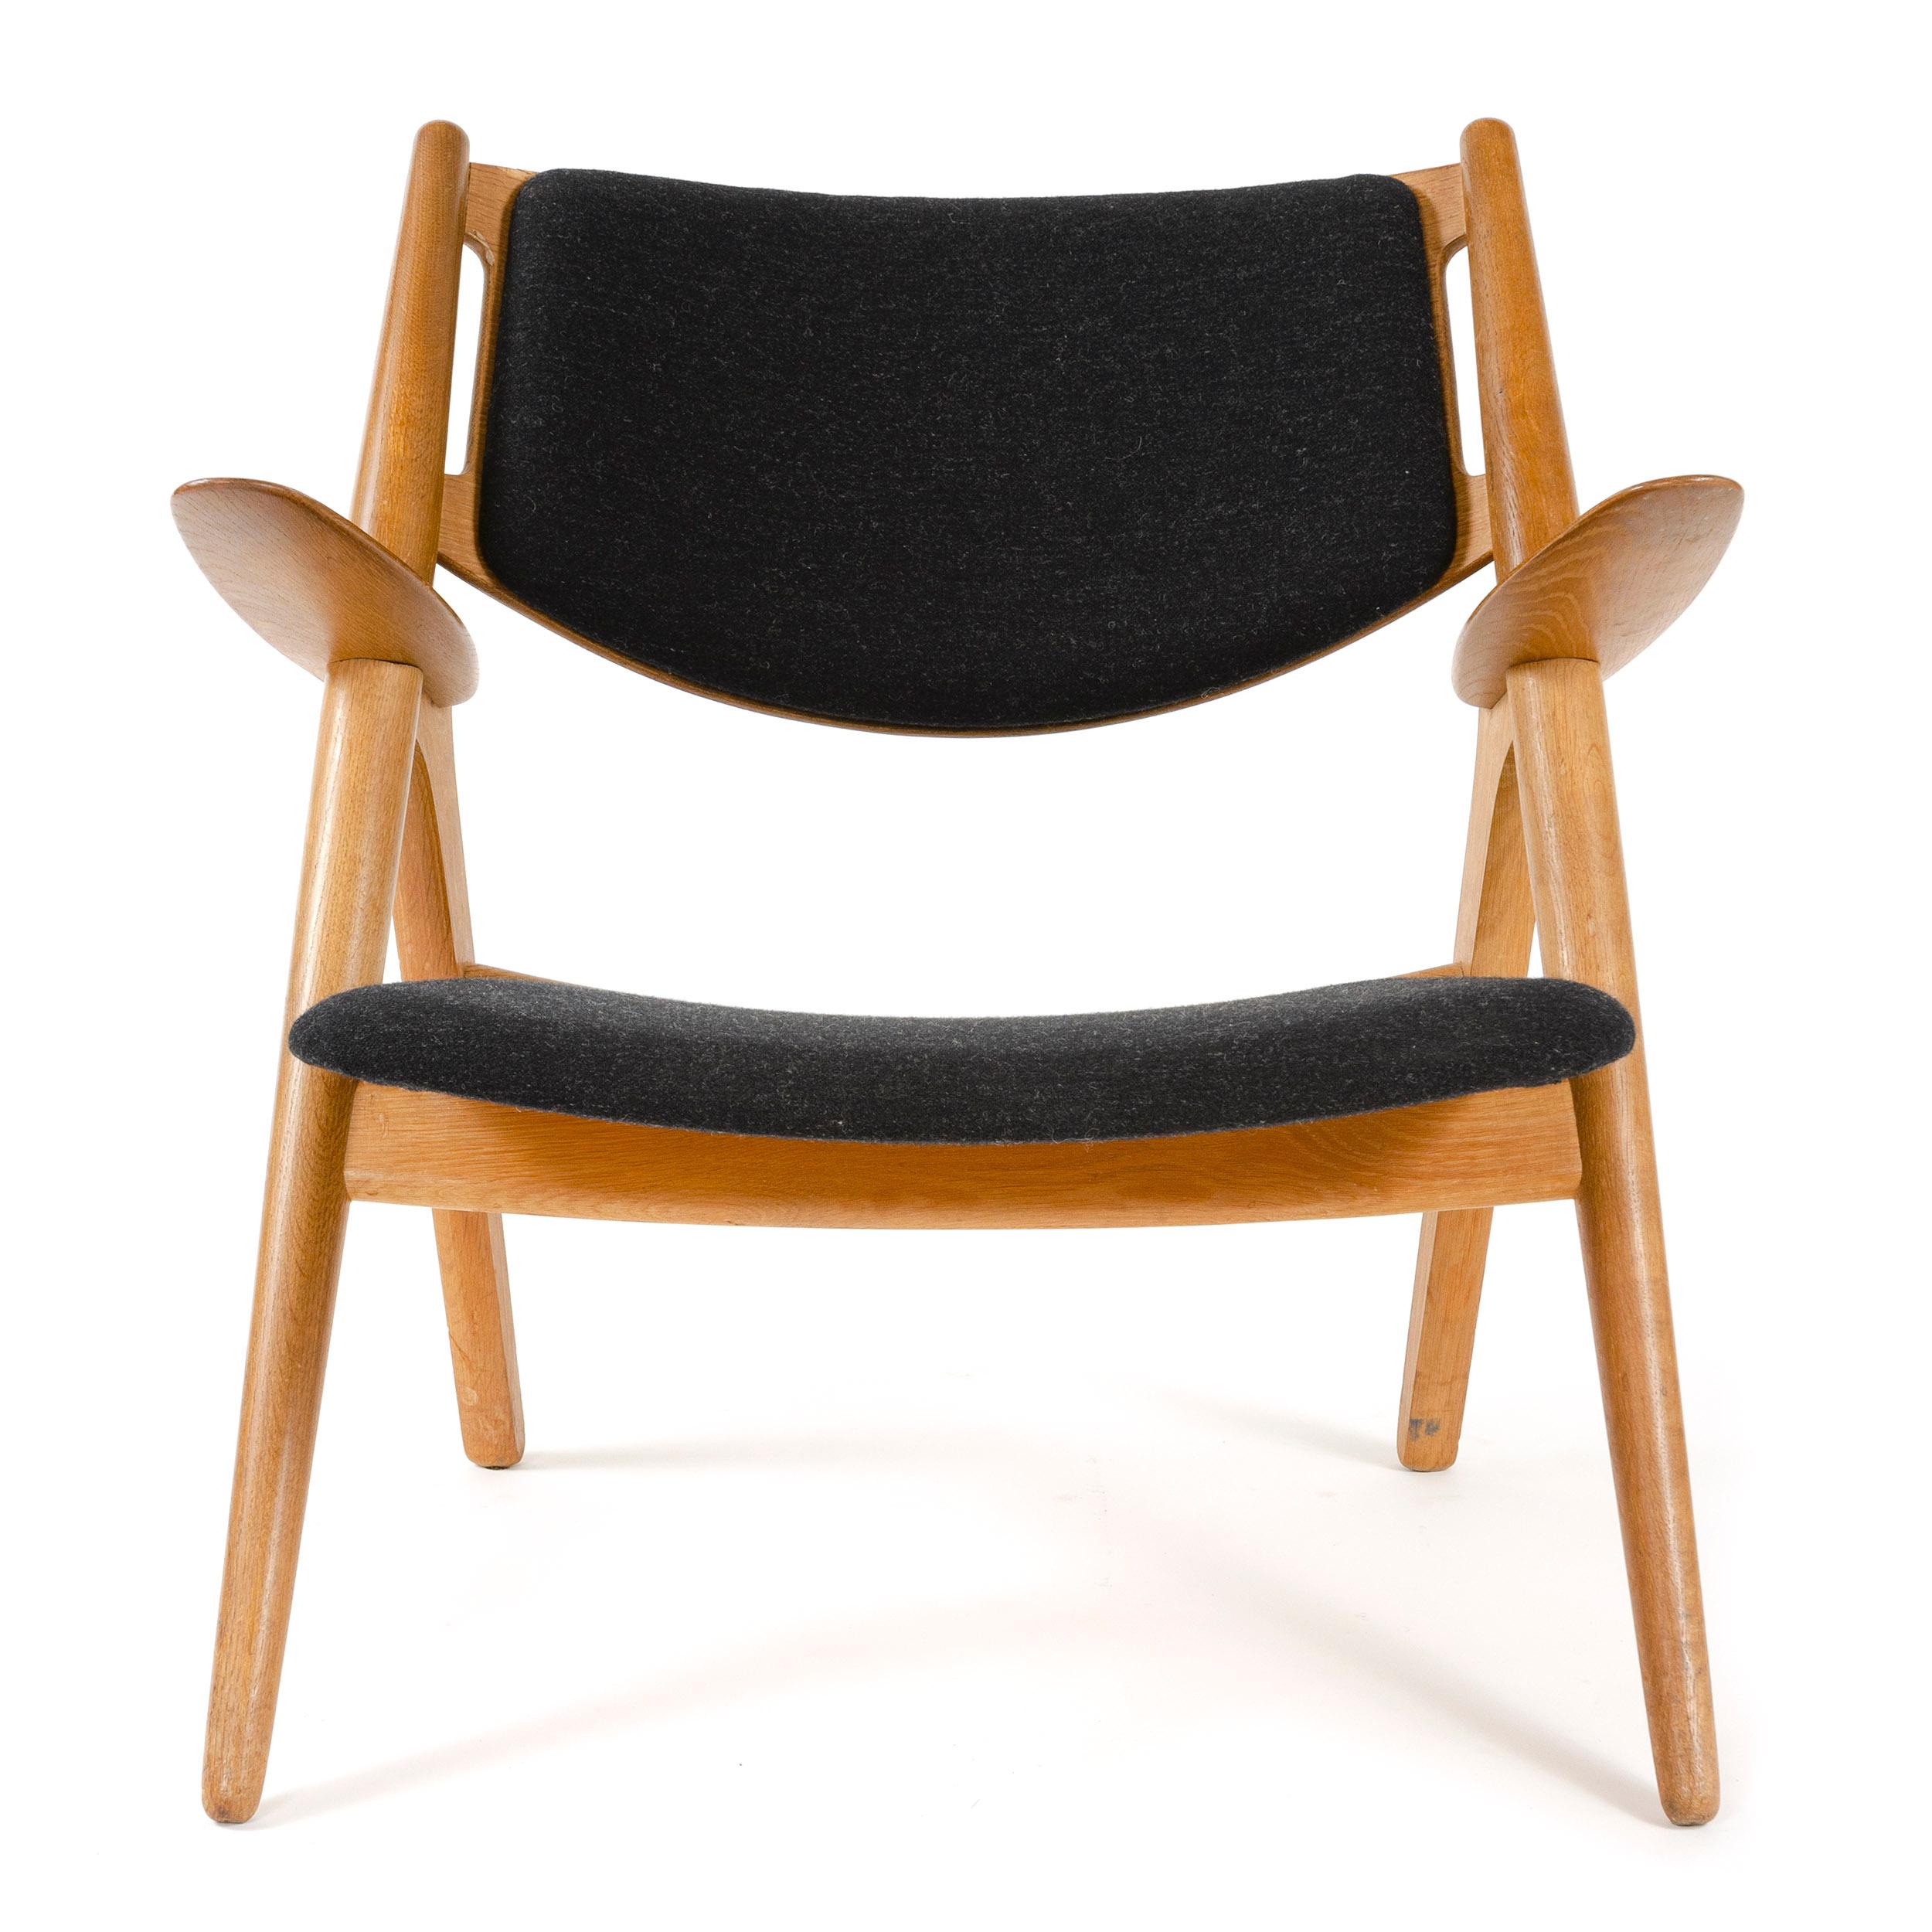 An oak 'Sawbuck' lounge chair having a generously proportioned Savak upholstered back and seat floating on an exposed architectural frame with cantilevered arm rests. Designed by Hans J. Wegner for Carl Hansen & Son in Denmark, 1950s.
24.5